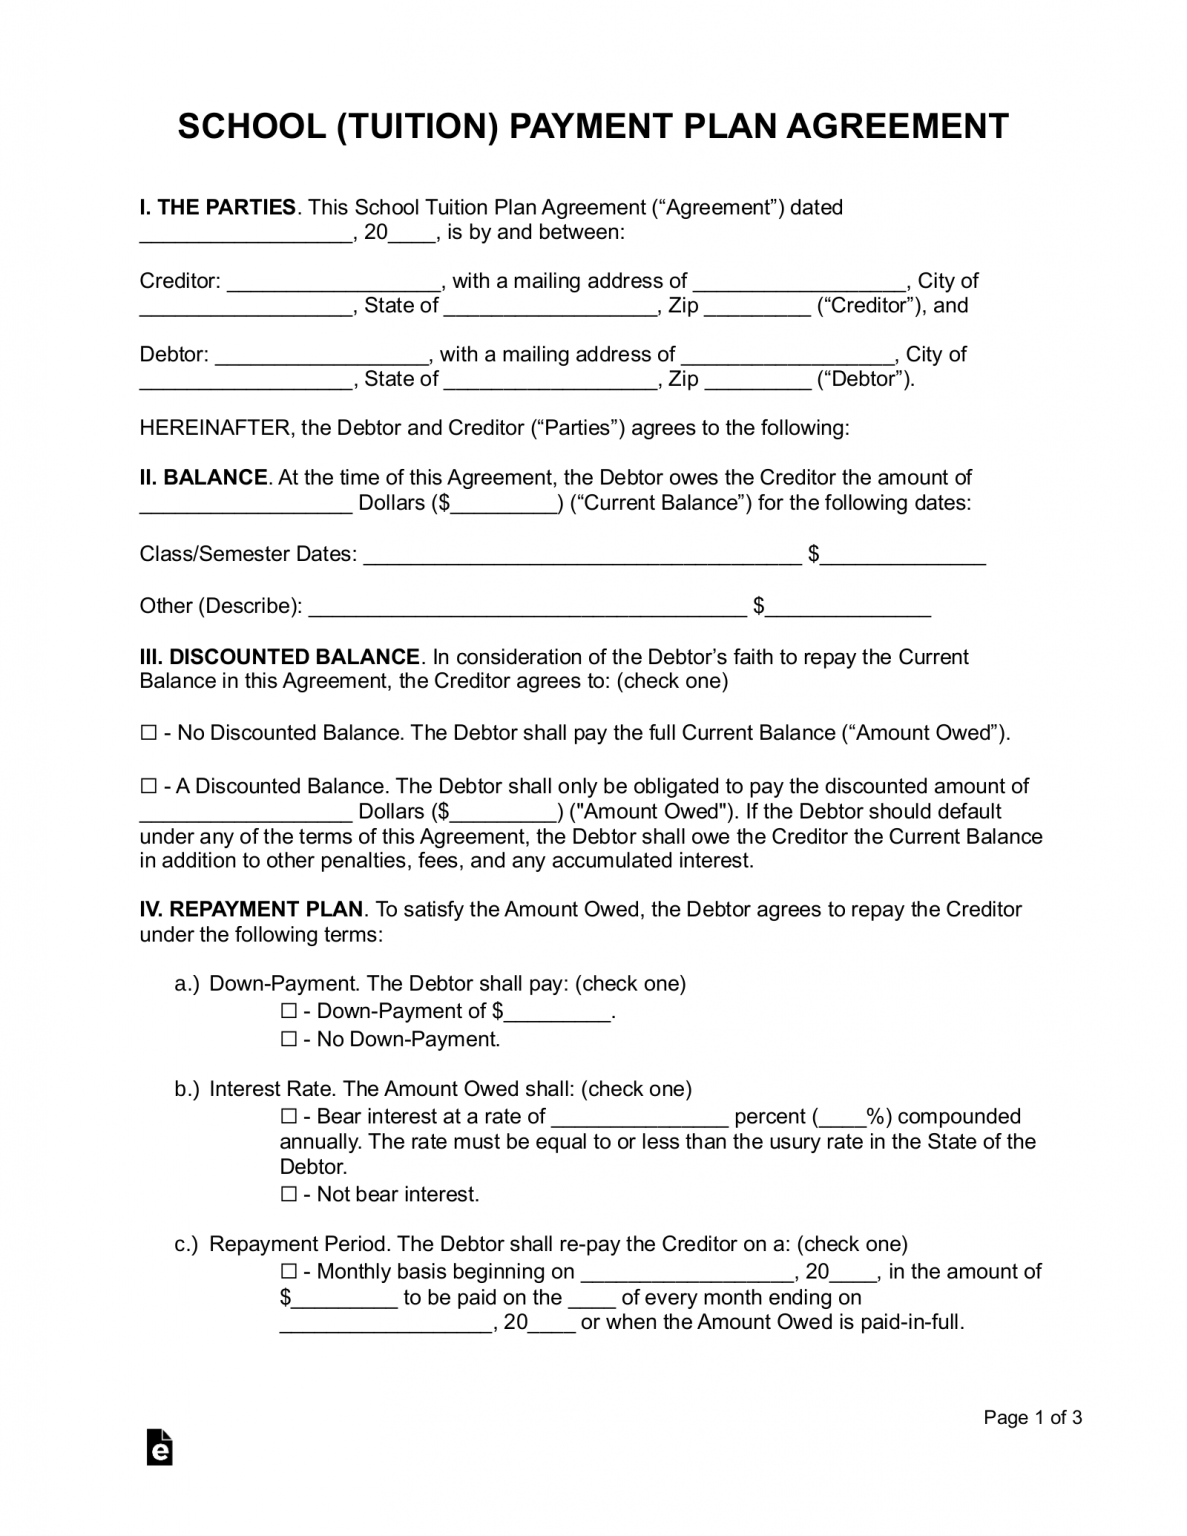 free-school-tuition-payment-plan-agreement-pdf-word-eforms